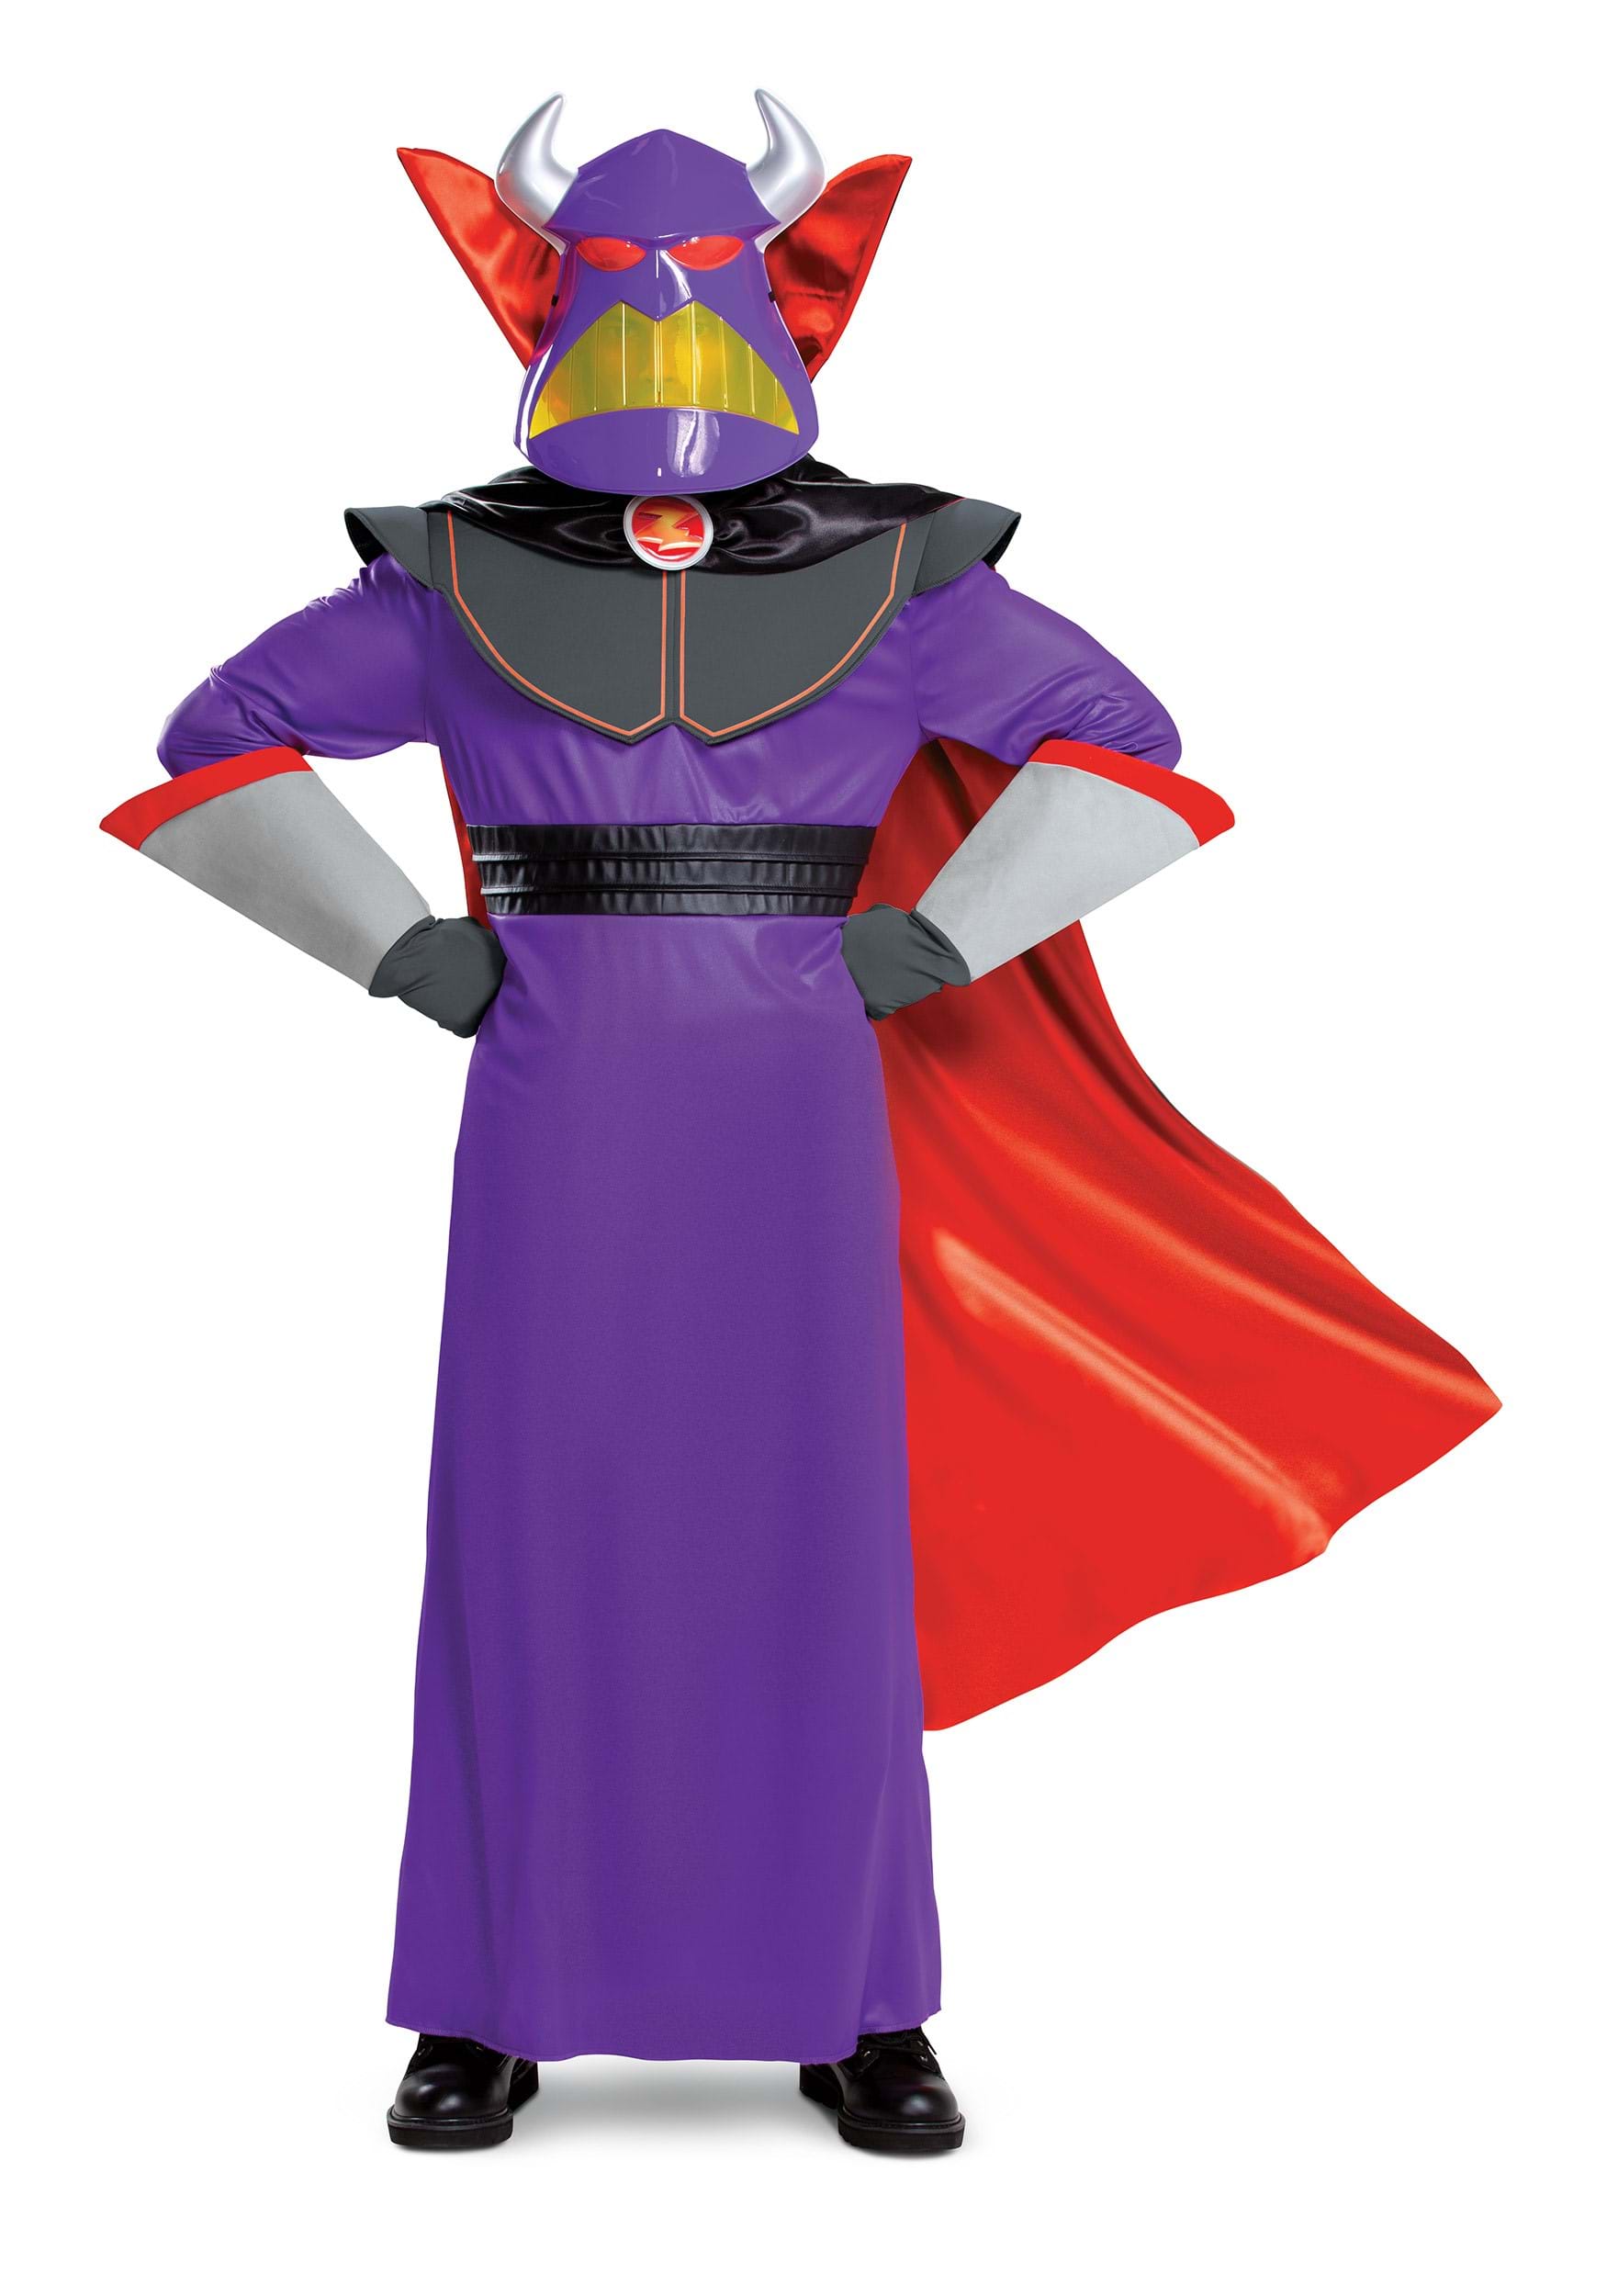 https://images.halloweencostumes.com/products/74411/1-1/toy-story-adult-emperor-zurg-deluxe-costume.jpg